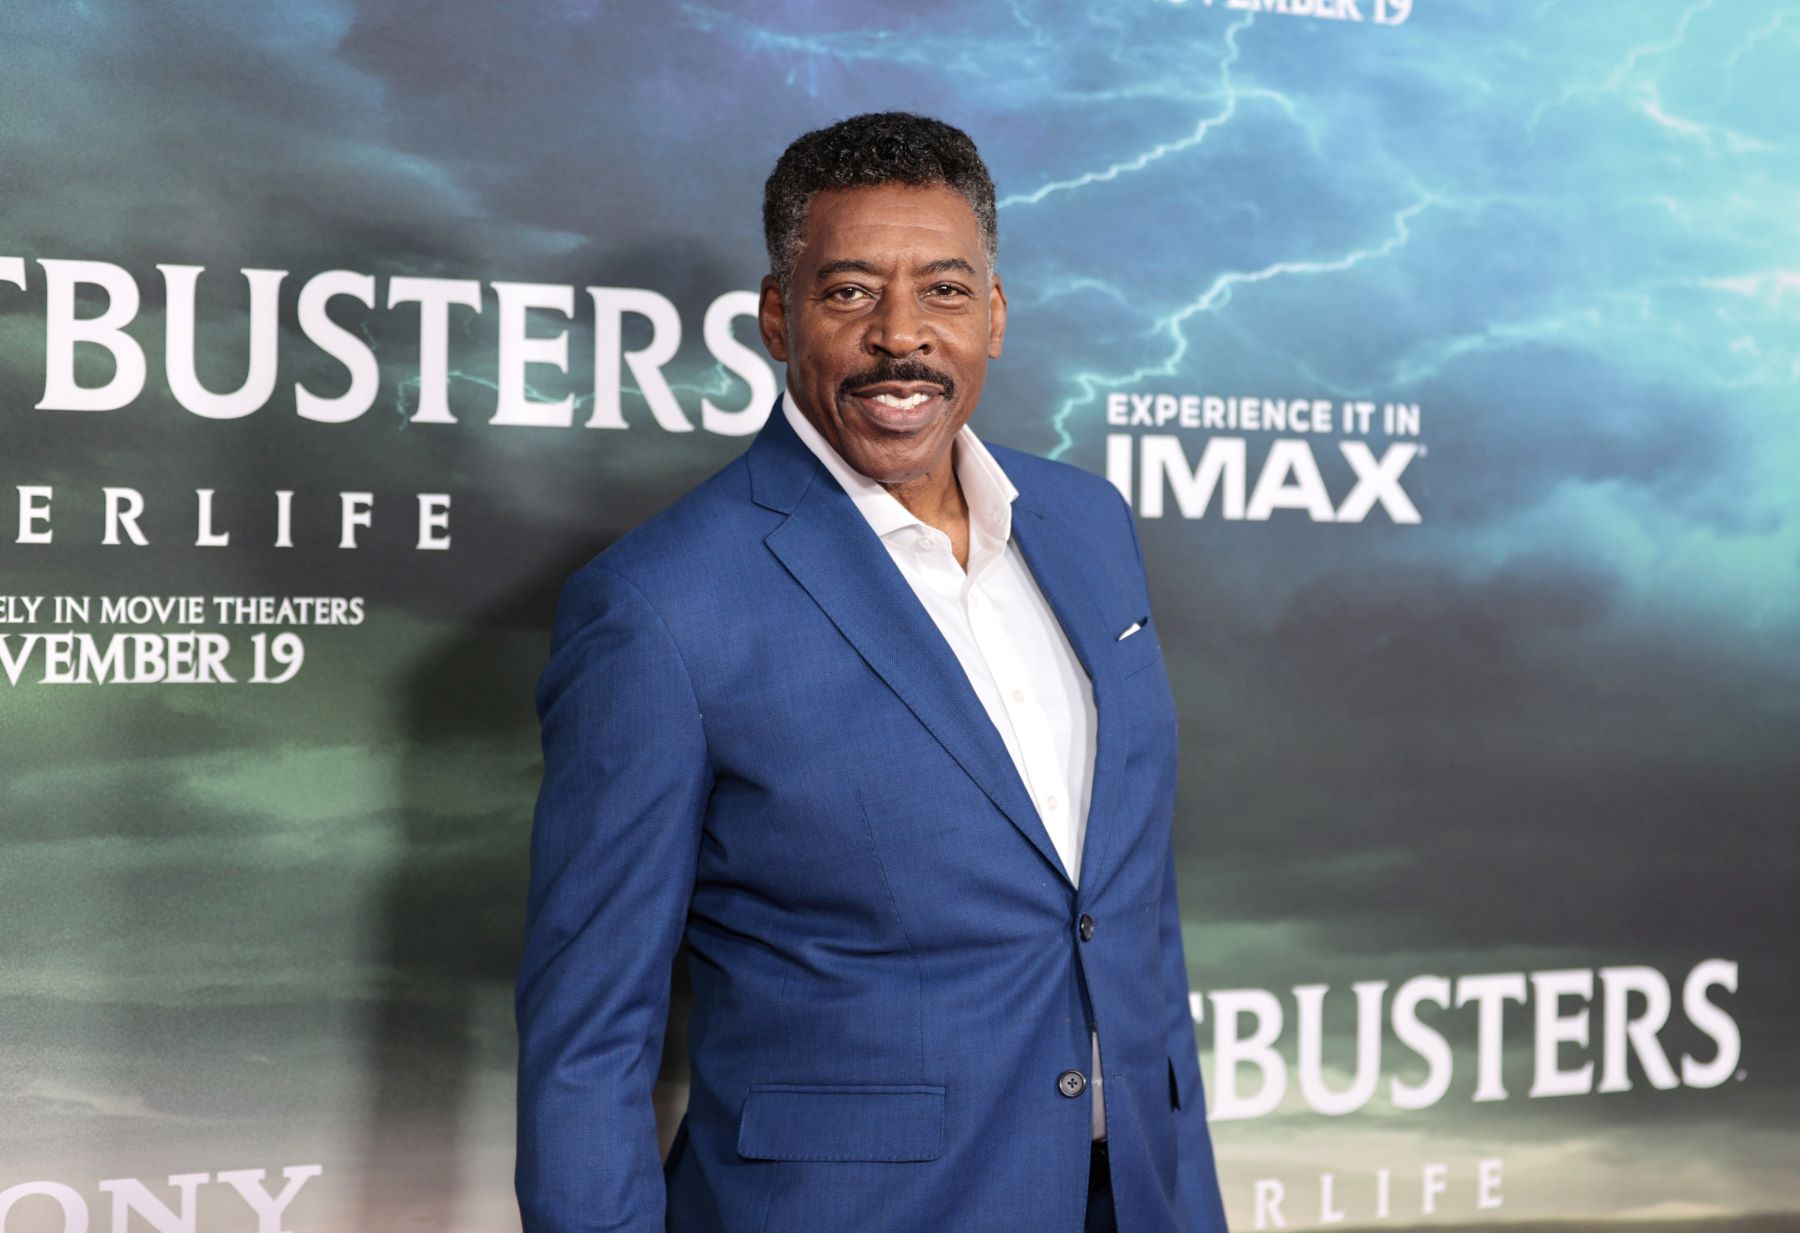 Ernie Hudson at the 'Ghostbusters: Afterlife' premiere at the AMC Lincoln Square Theater in New York City